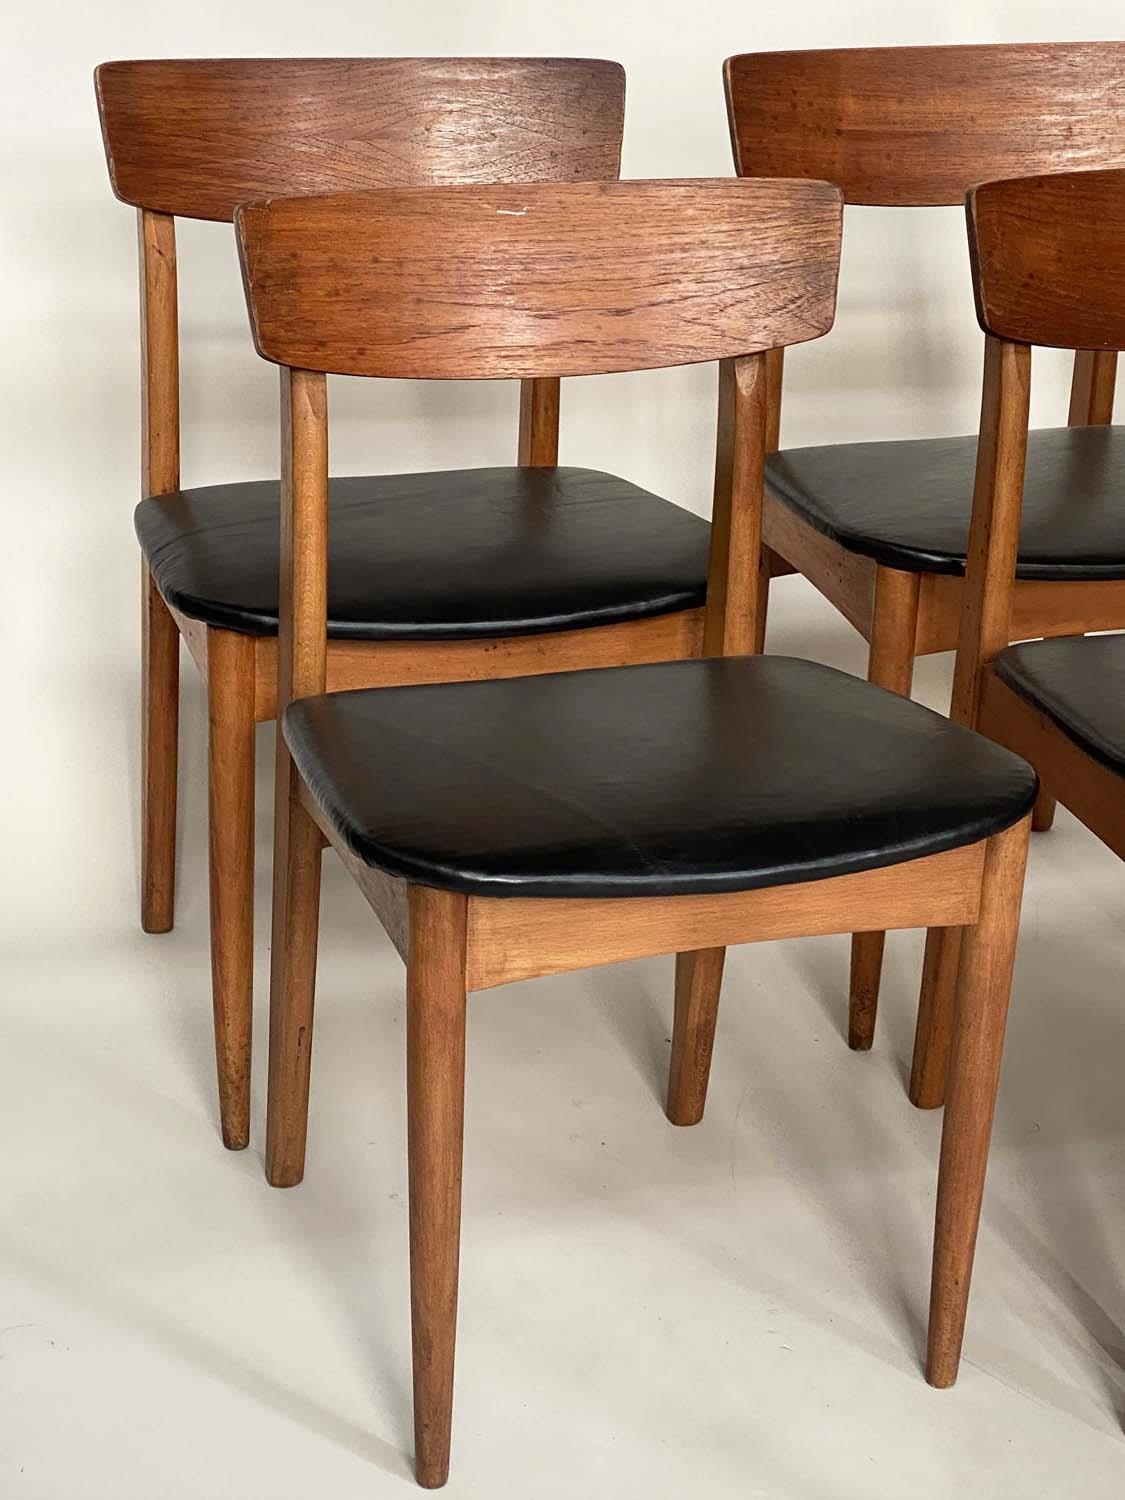 DINING CHAIRS, a set of seven, 1970's teak Danish style with black leather seats and carved backs - Image 2 of 5